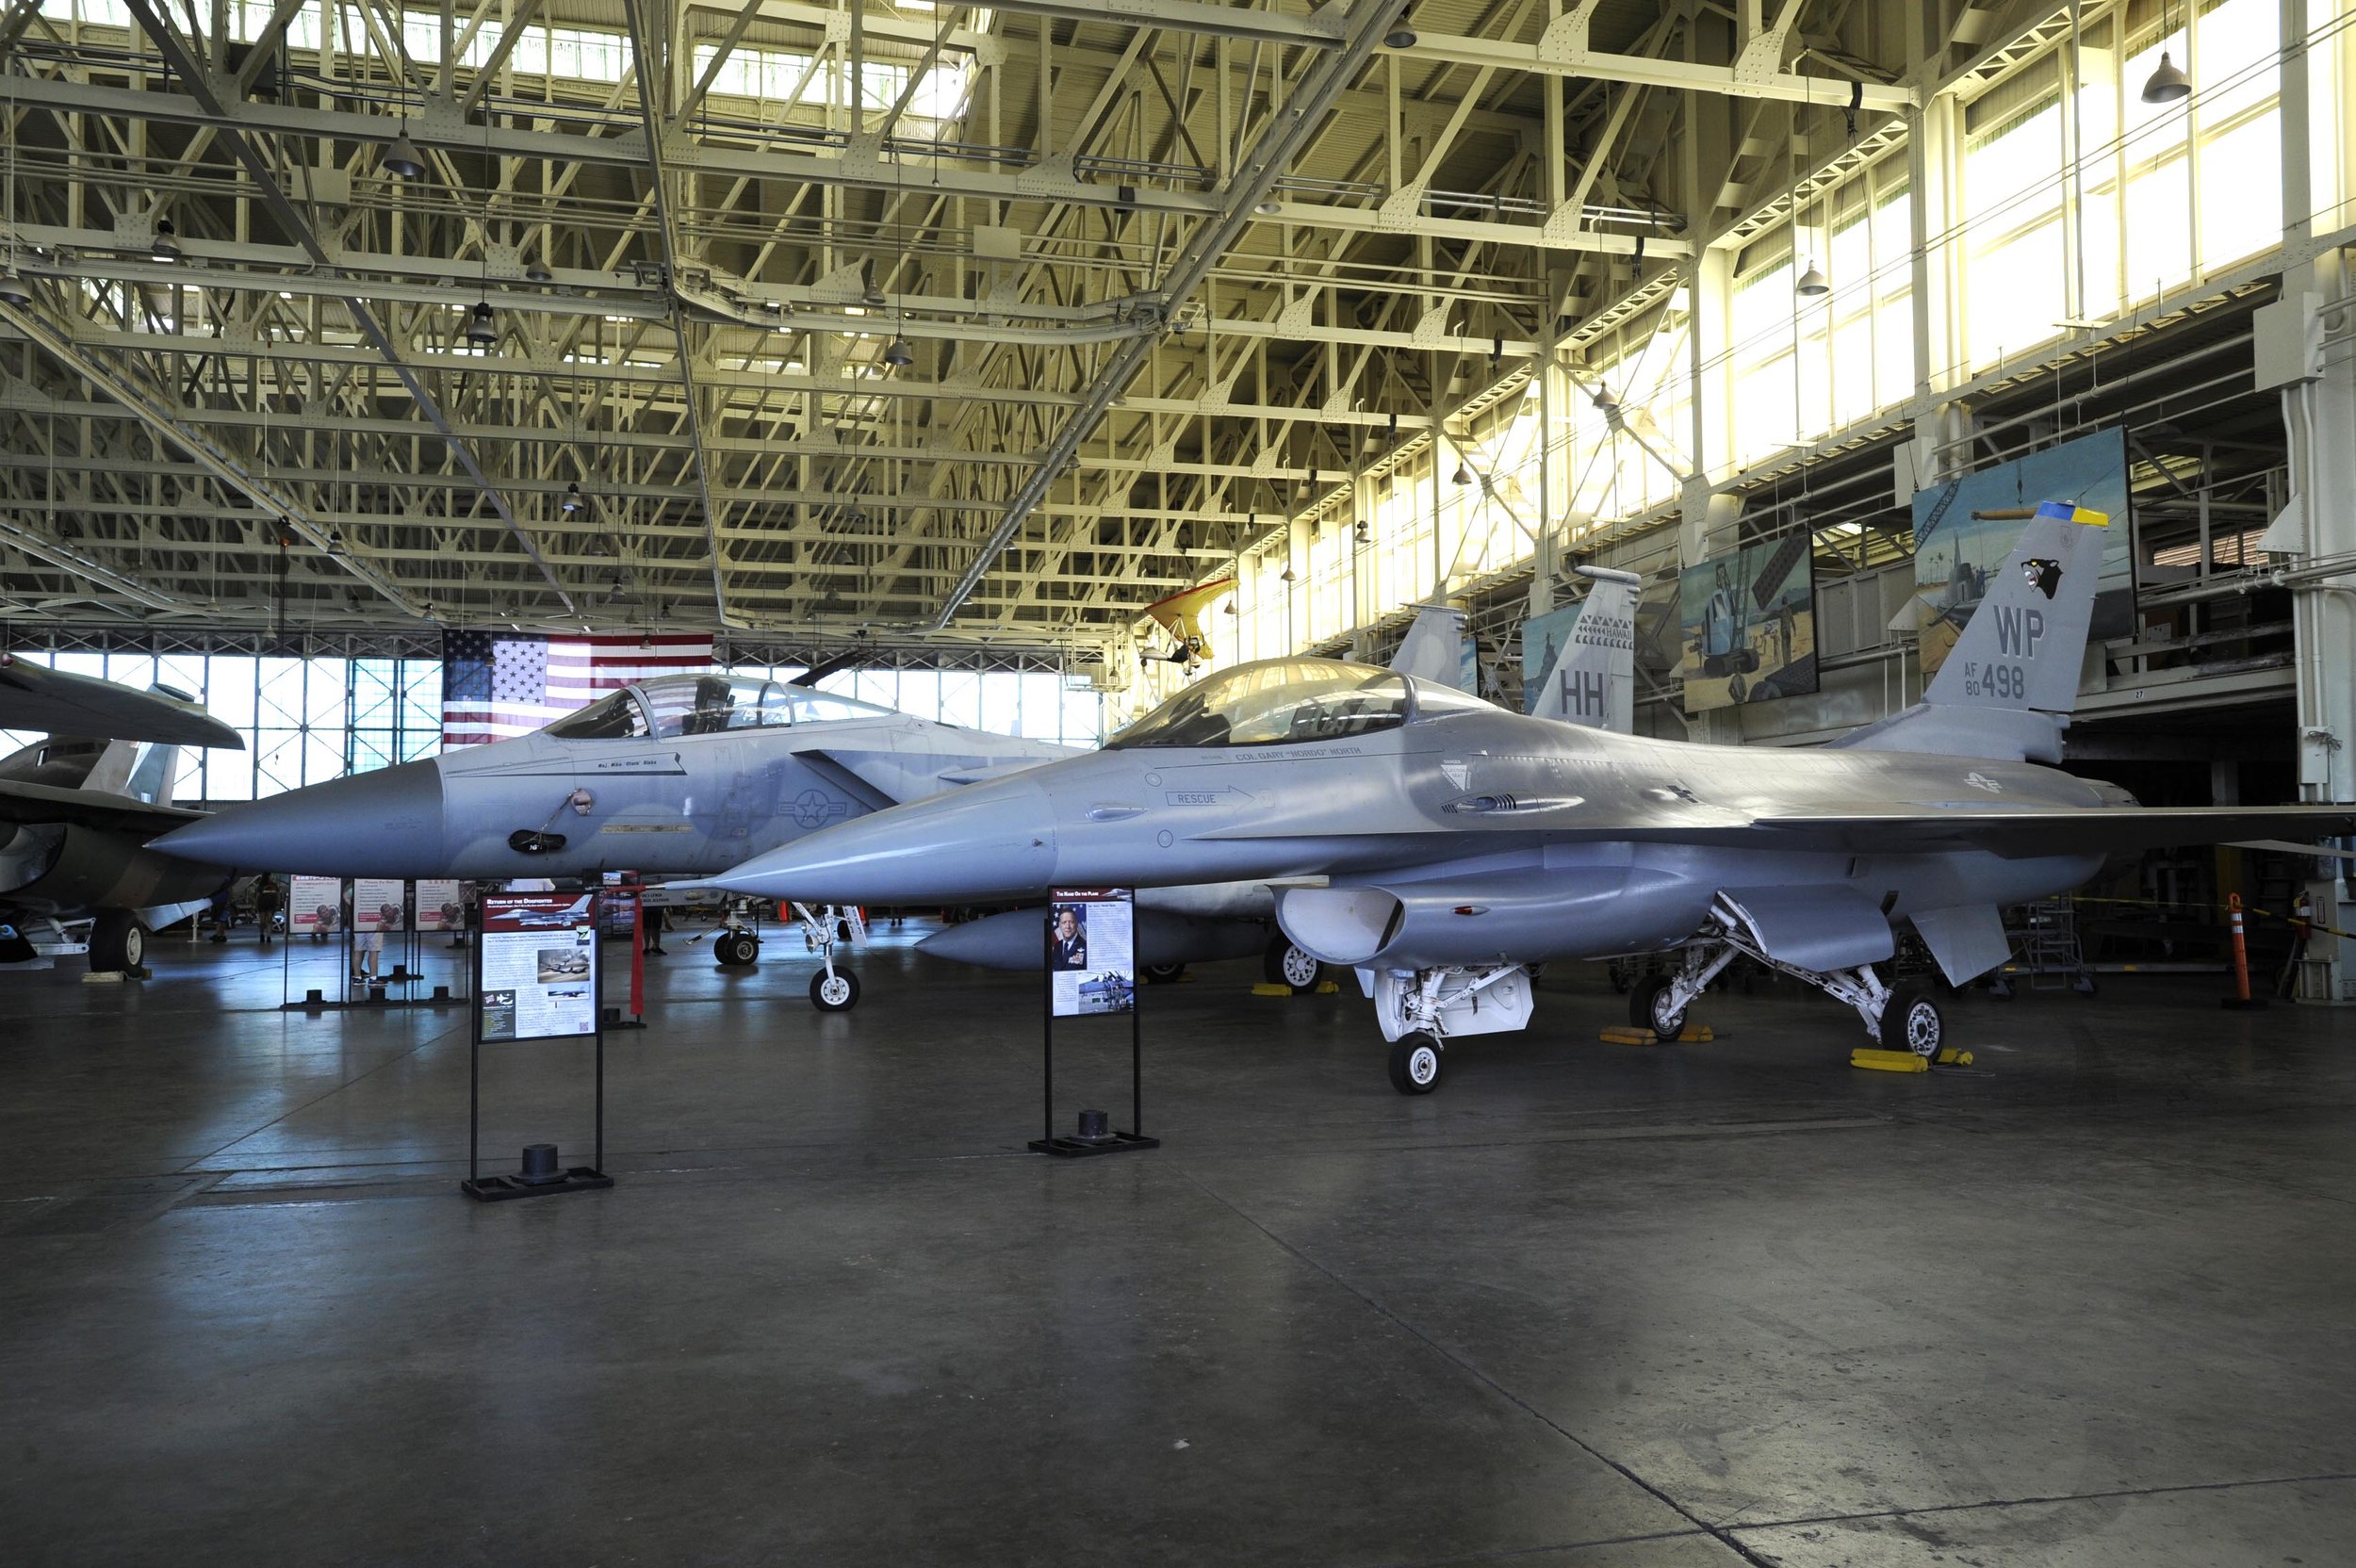  An F-16A Fighting Falcon was gifted to Pacific Aviation Museum Pearl Harbor by renowned dentist and philanthropist Dr. Lawrence Tseu and his late wife BoHing Chan Tseu in 2017 ( photo by Dennis Oda, Honolulu Star-Advertiser ).  